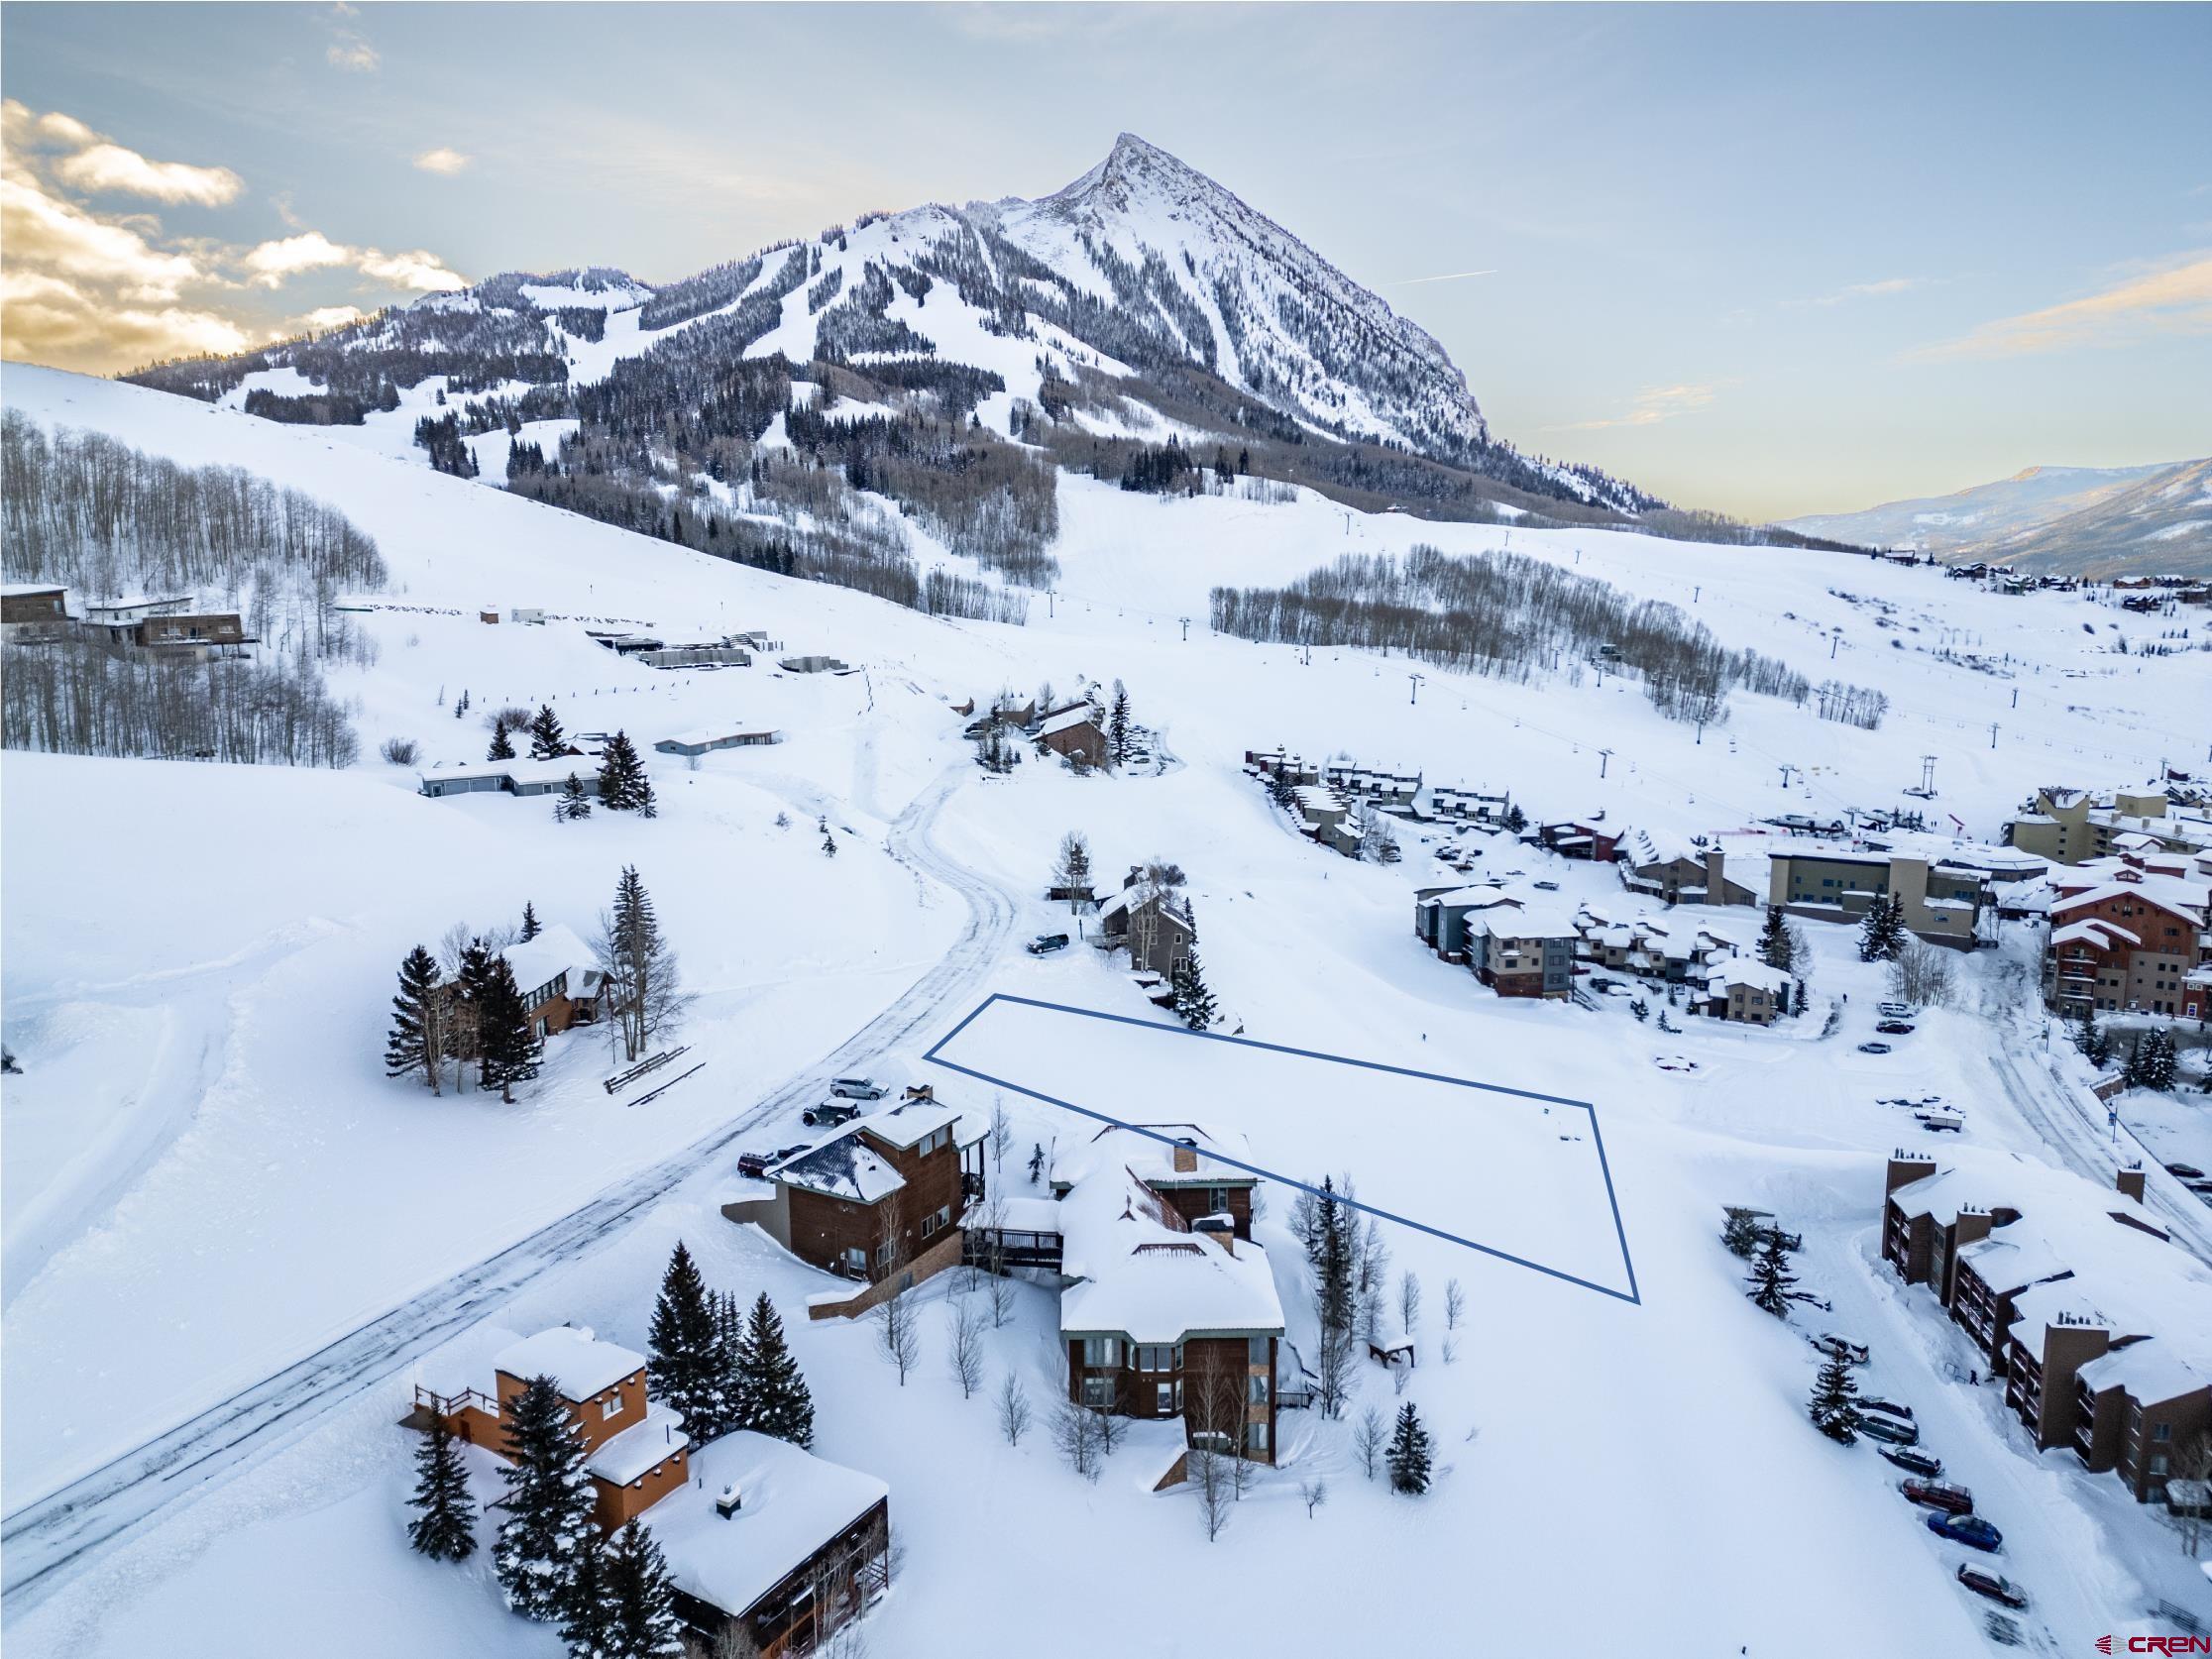 41 Whetstone Road, Mt. Crested Butte, CO 